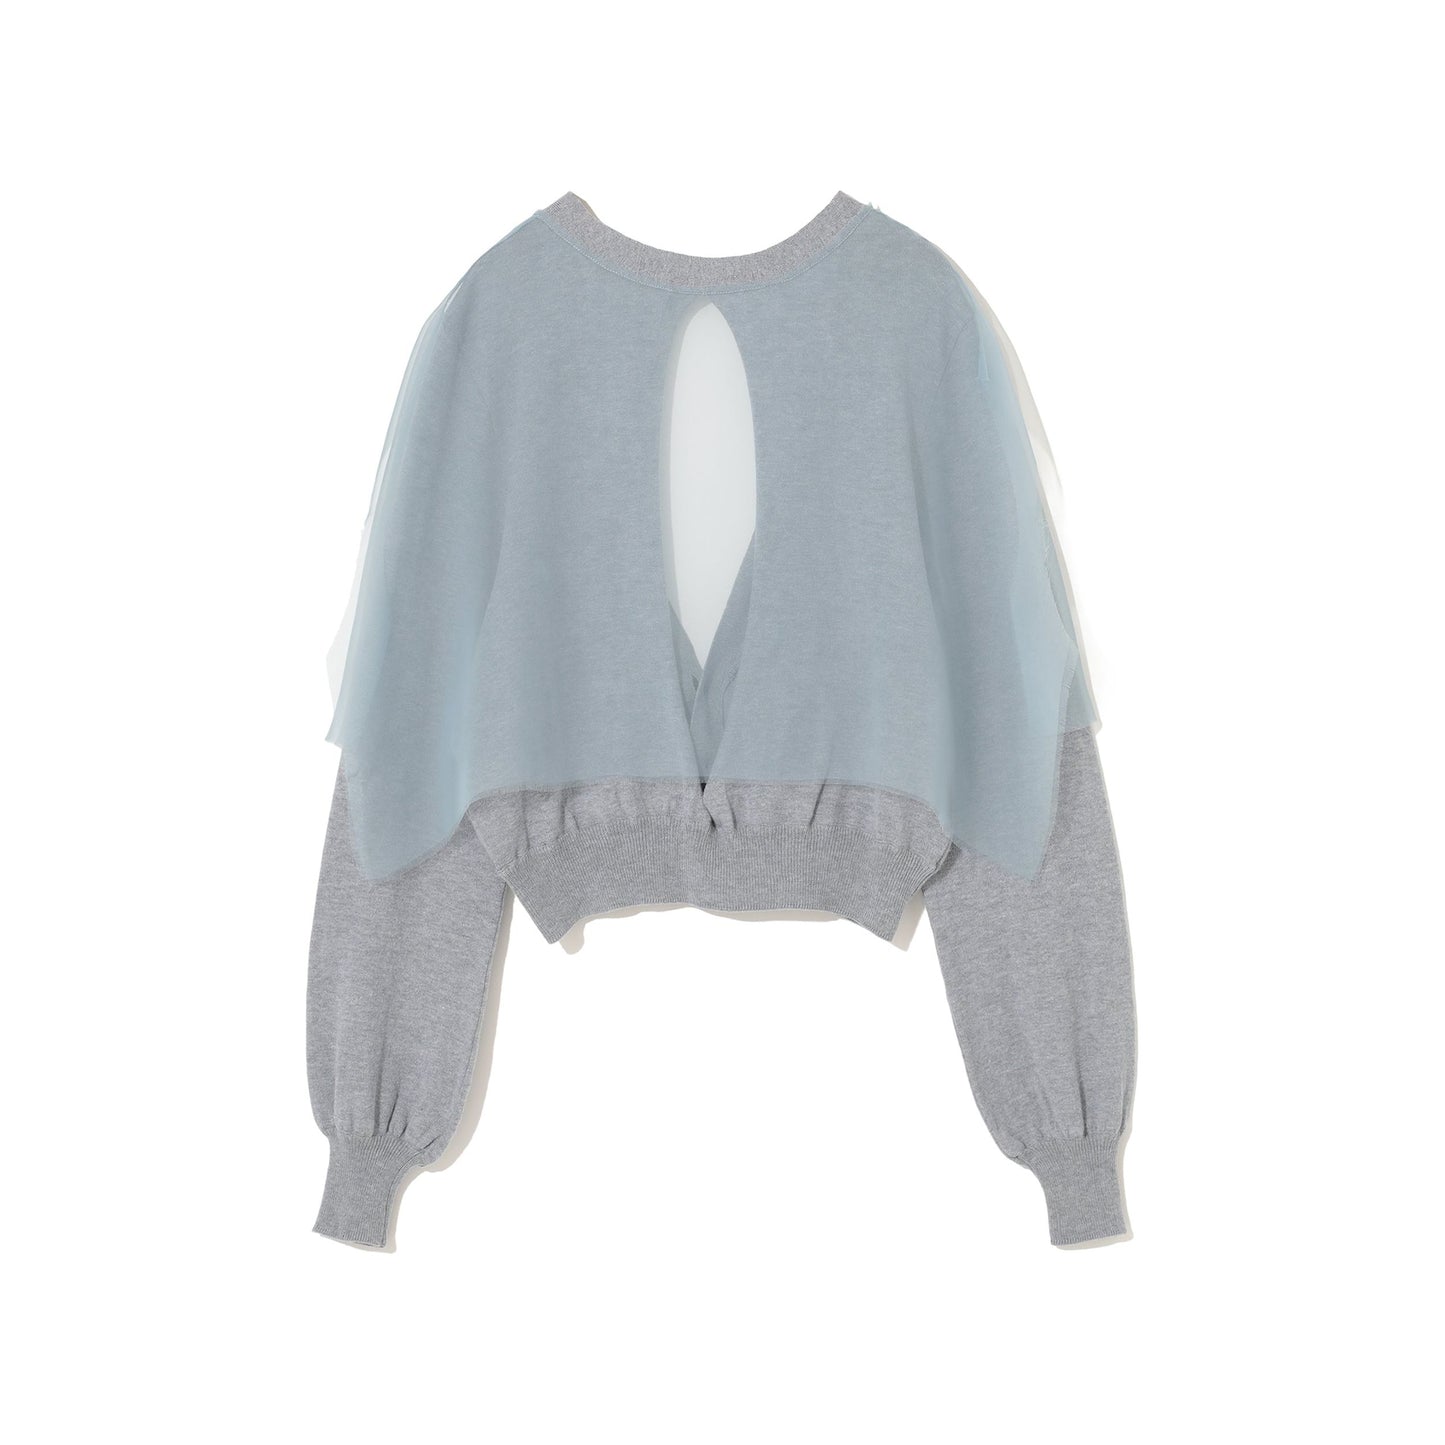 Undercover Shirts & Tops Undercover Grey Knit Cardigan